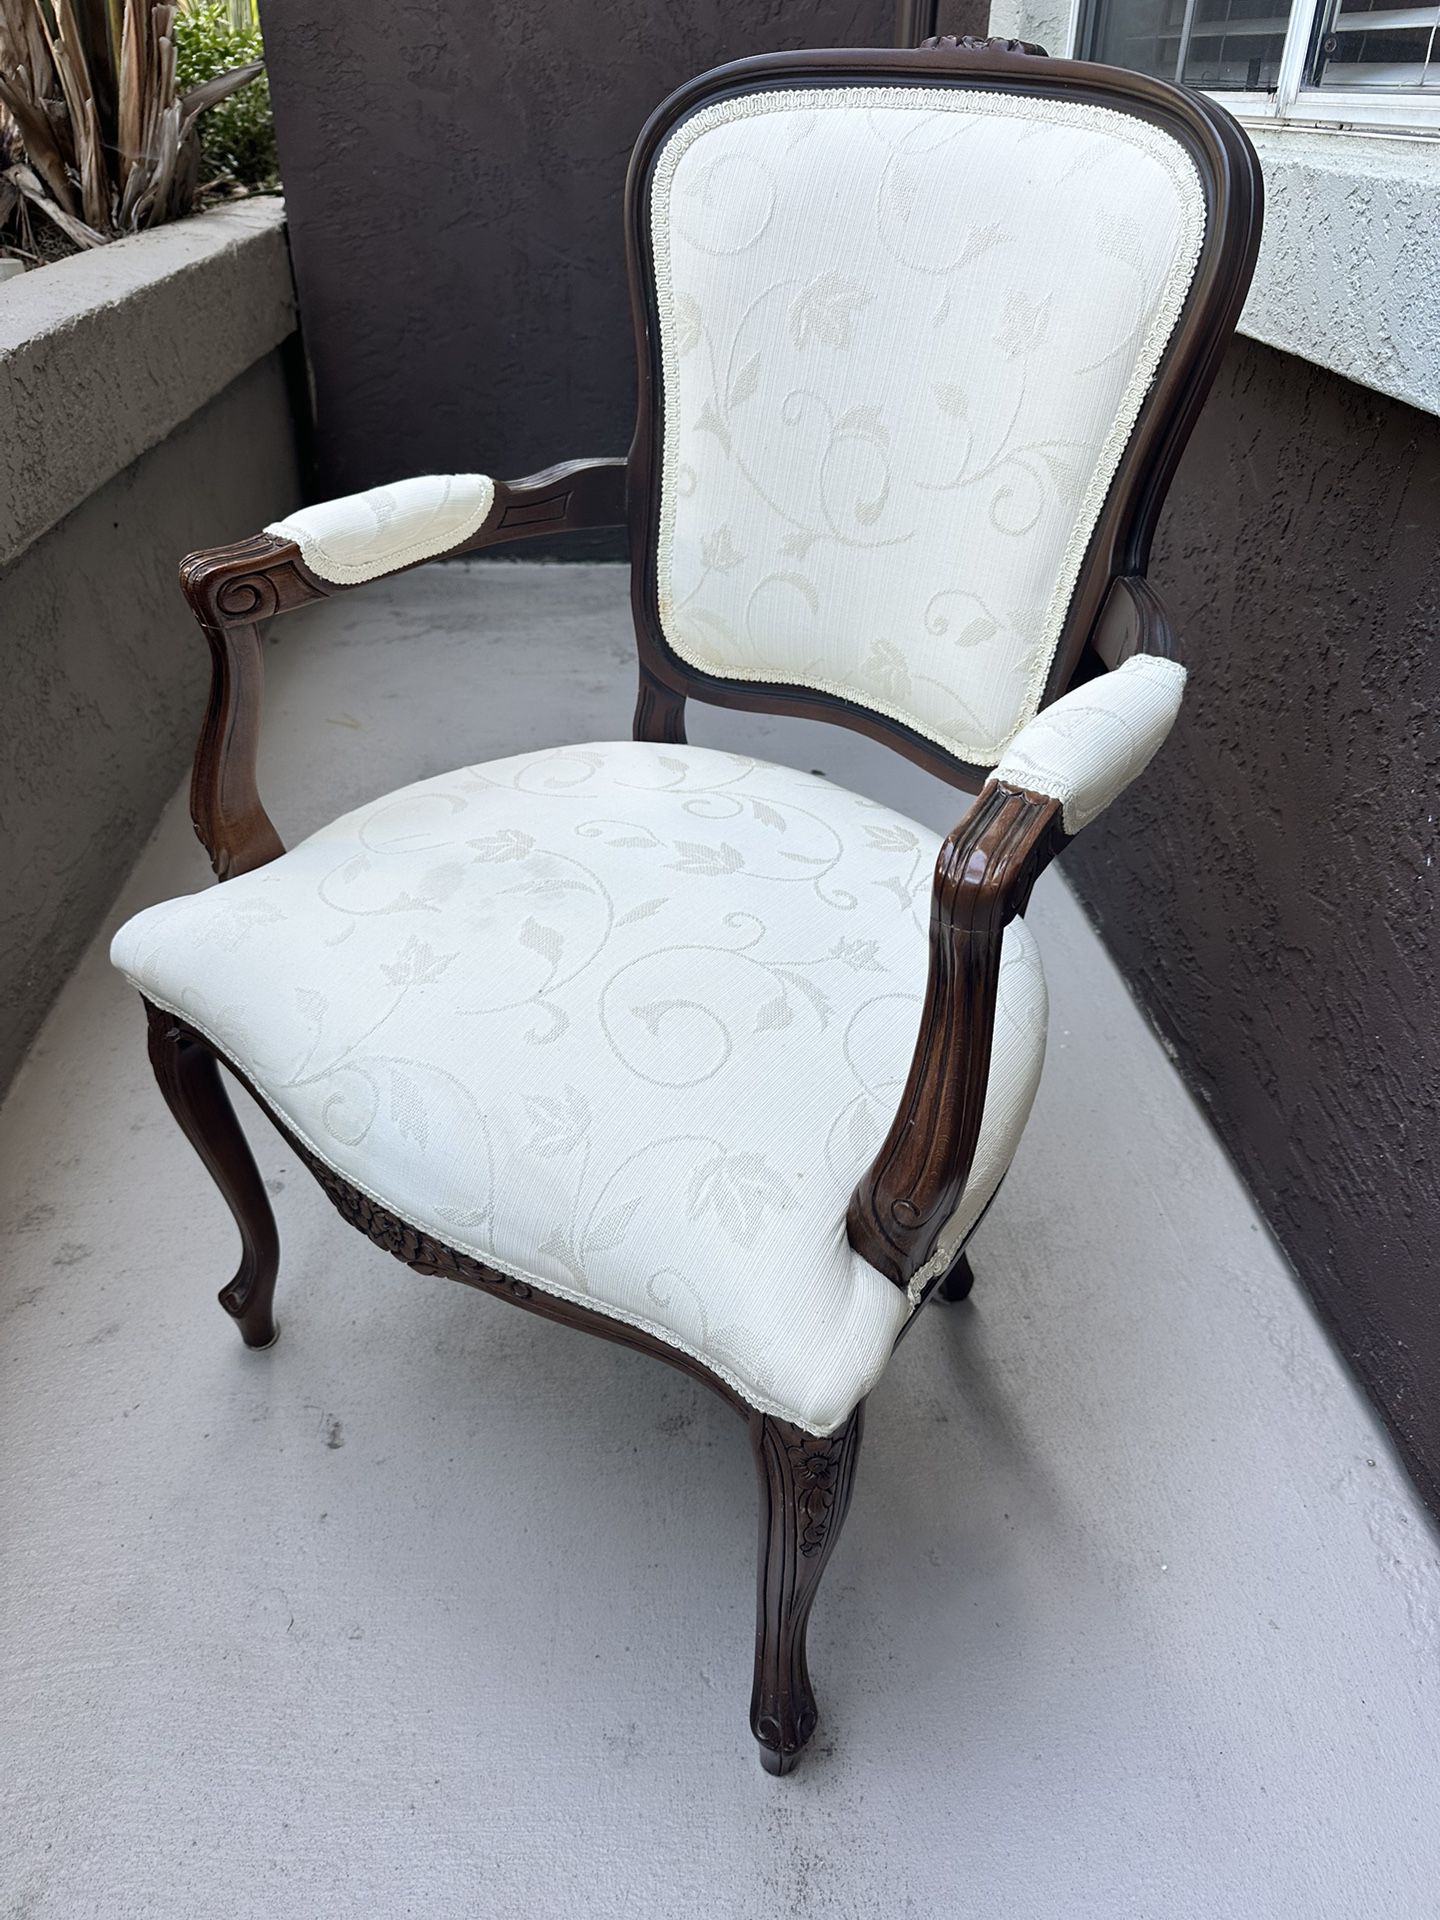 Vintage White/Cream Upholstered Wooden Arm Chair